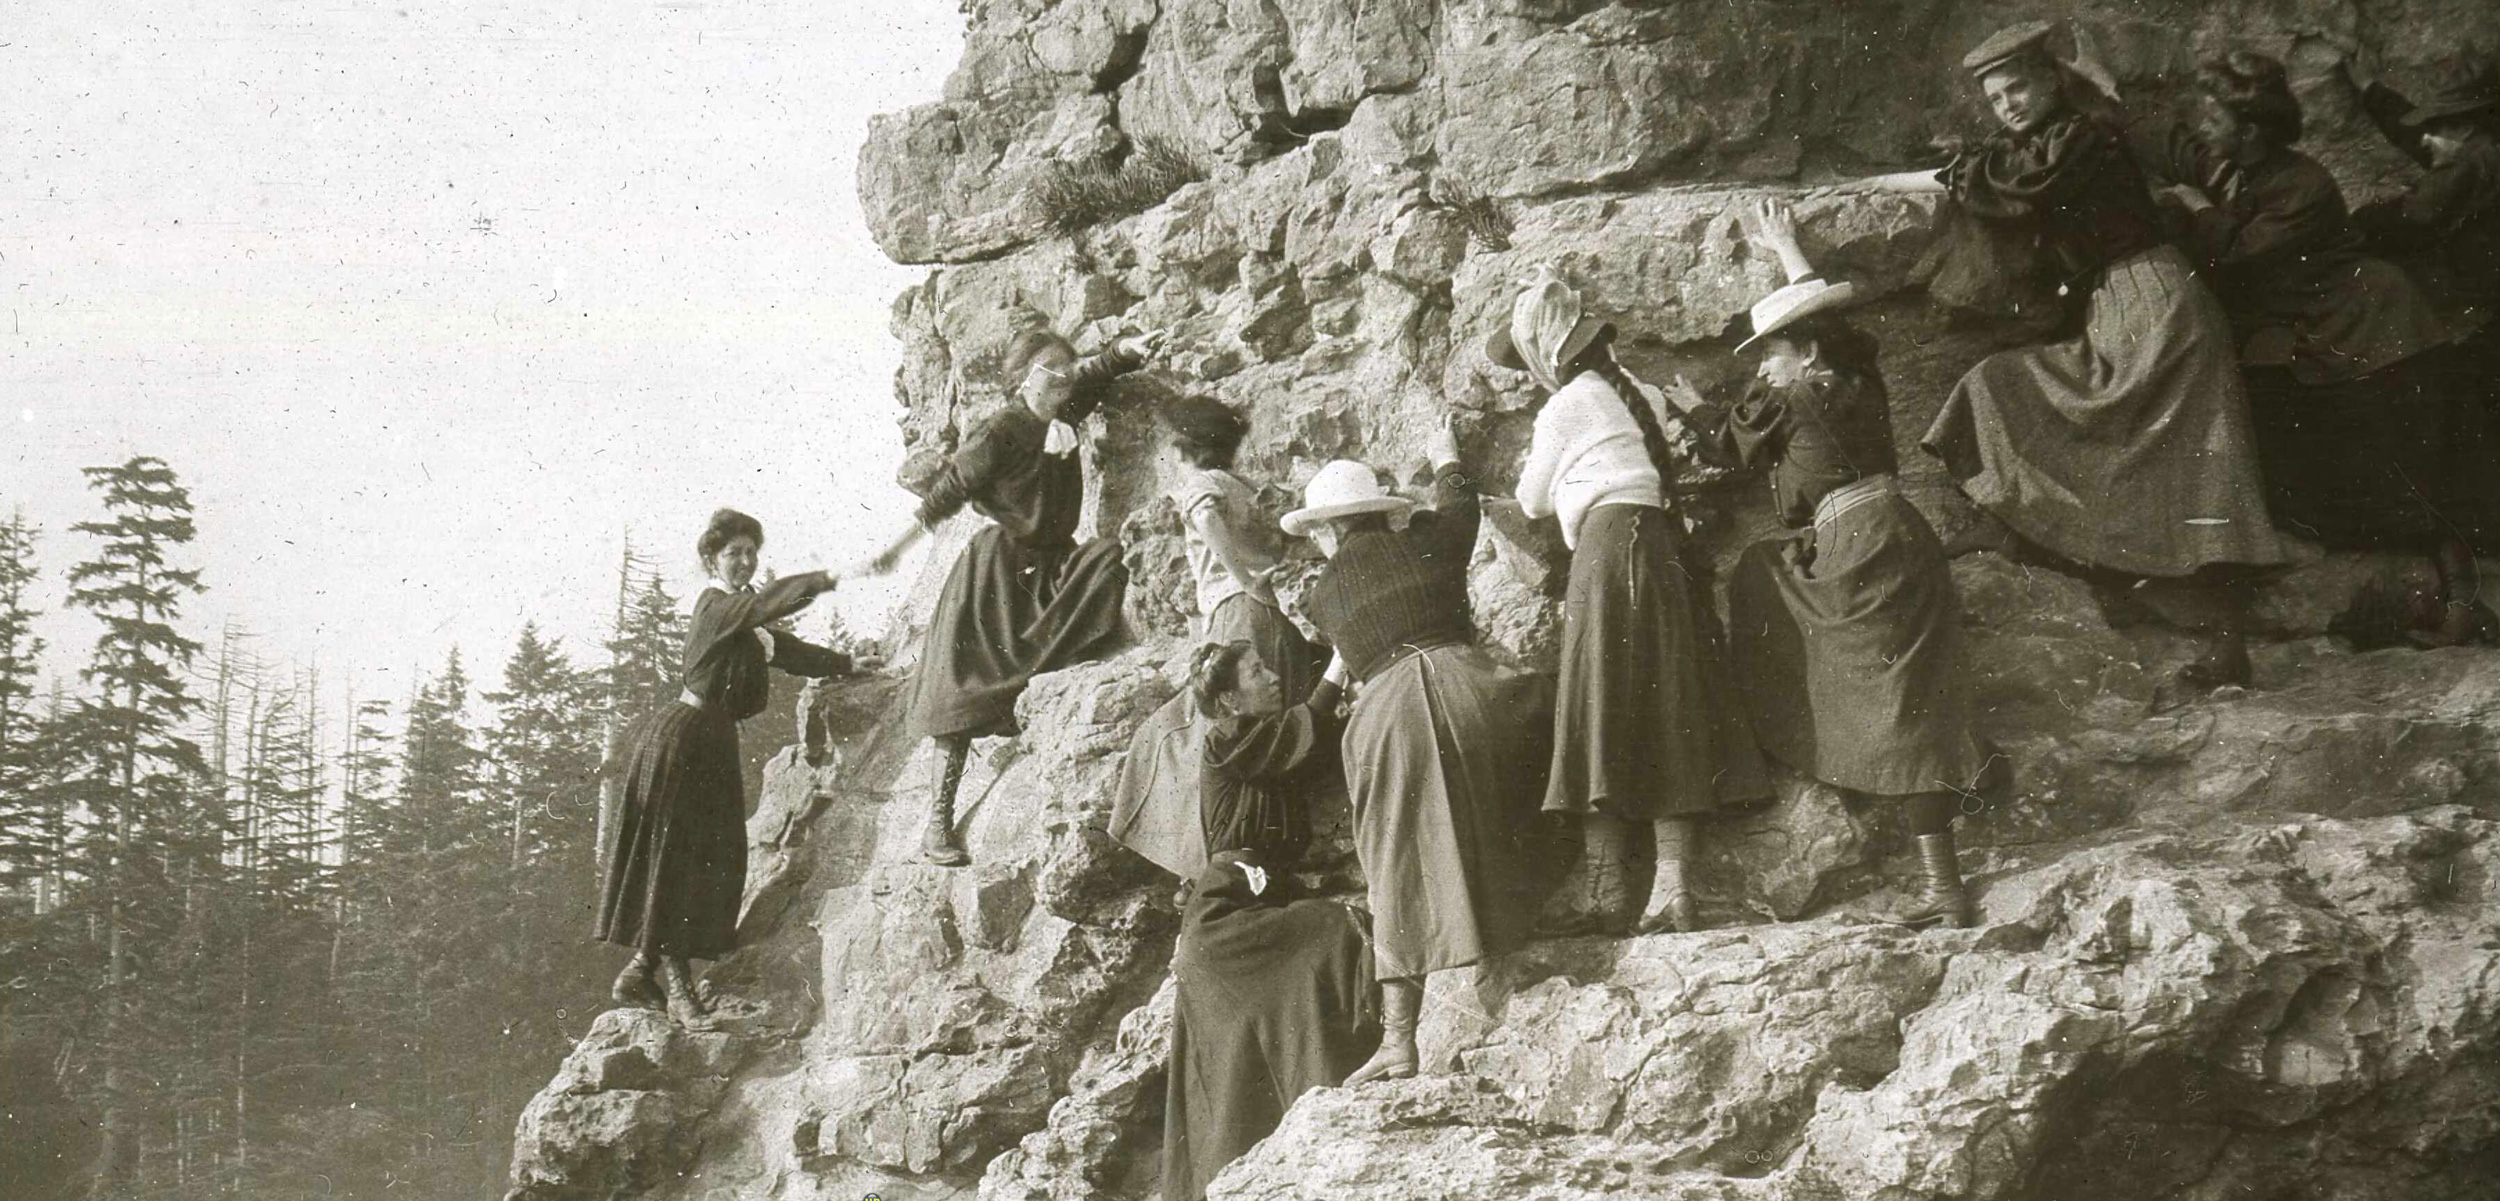 Young women studying at the Minnesota Seaside Station were advised to wear “a short skirt, about 12 inches from the ground” for fieldwork. Photo courtesy of the University of Minnesota